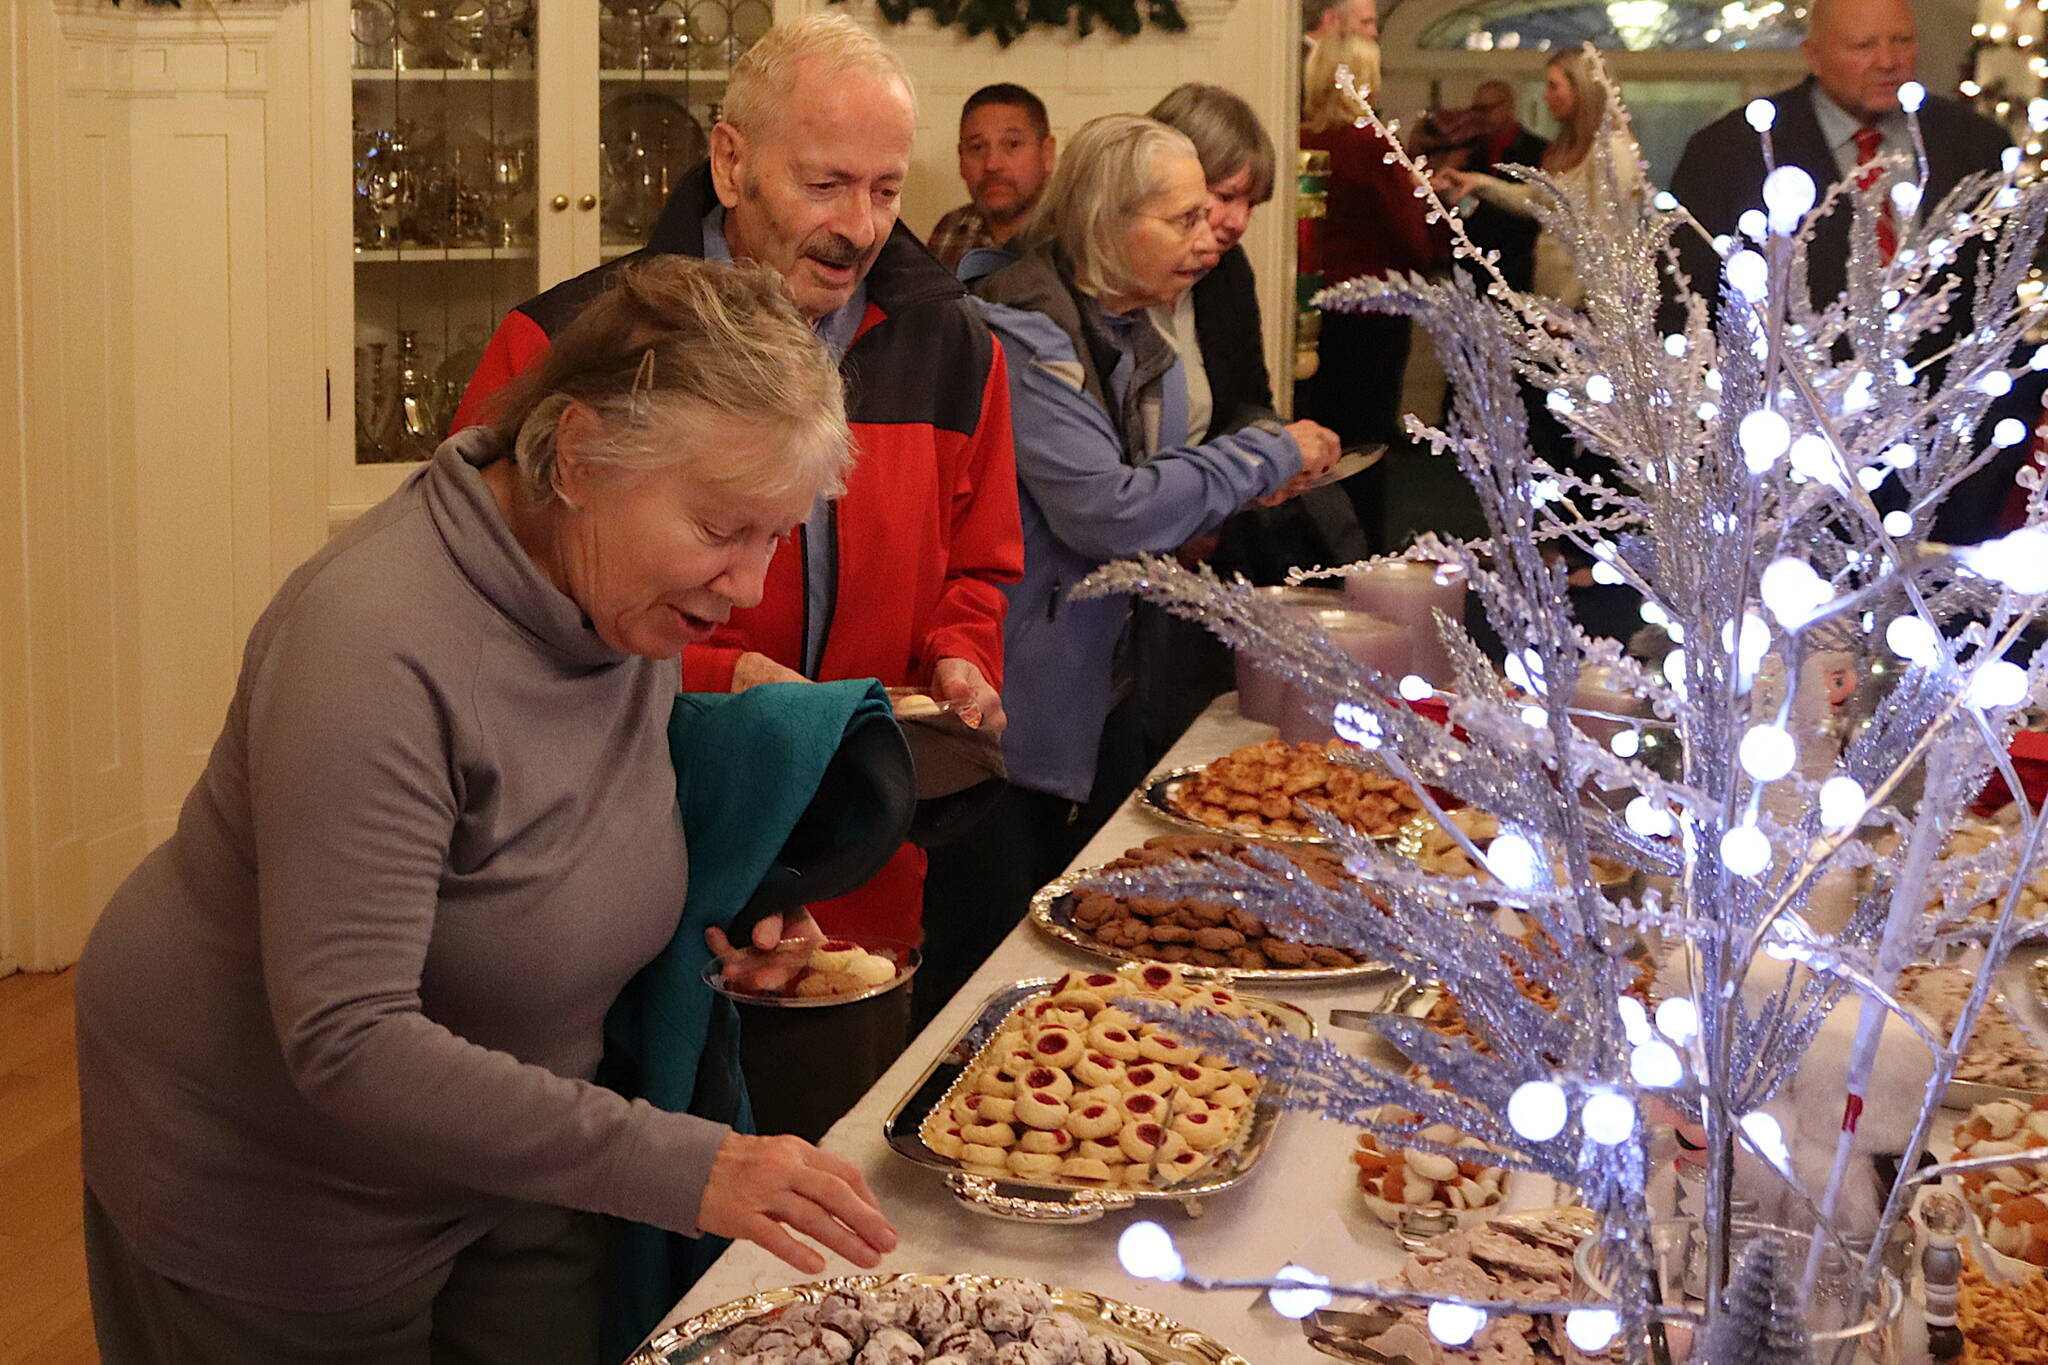 Julie and Richard Folta help themselves to some of the 21,350 cookies prepared for the annual Holiday Open House at the Governor’s Residence on Tuesday. Richard Folta said his first visit to an open house hosted by the governor occurred many years before Alaska became a state in 1959. (Mark Sabbatini / Juneau Empire)